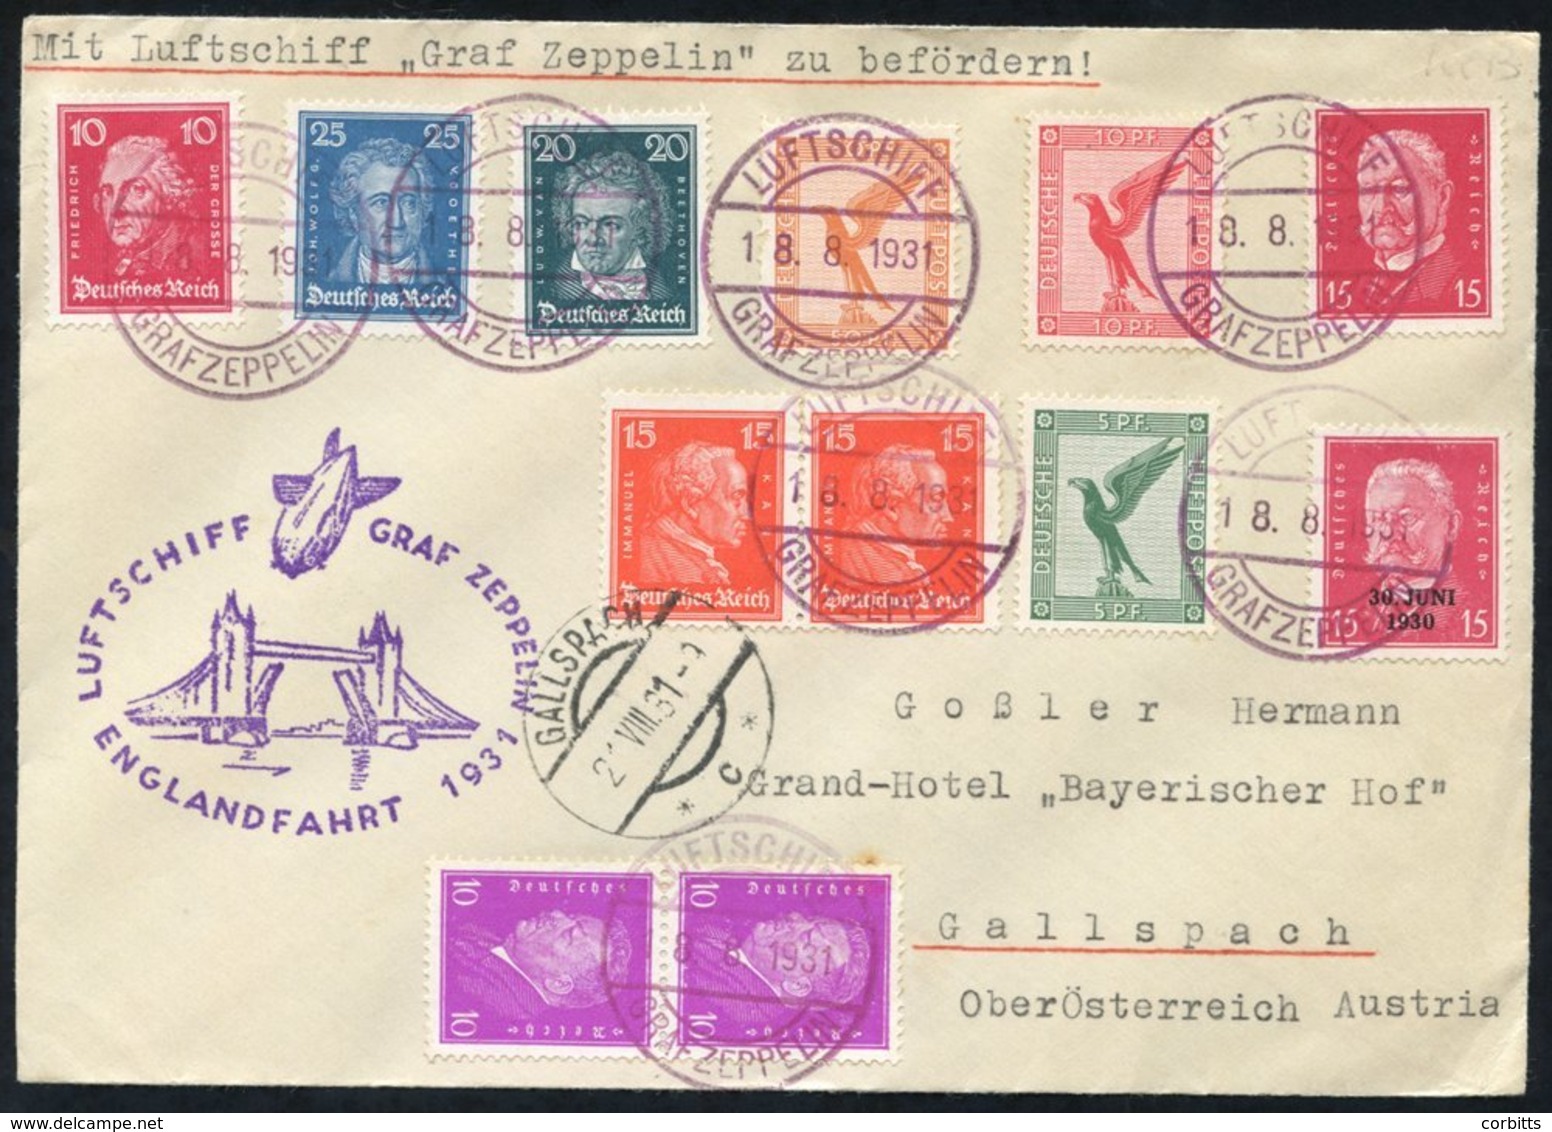 1931 Multi Franked Cover Flown To Gallspach, Austria Via The England Flight, Various German Vals Tied With 'on Board' Ca - Autres & Non Classés